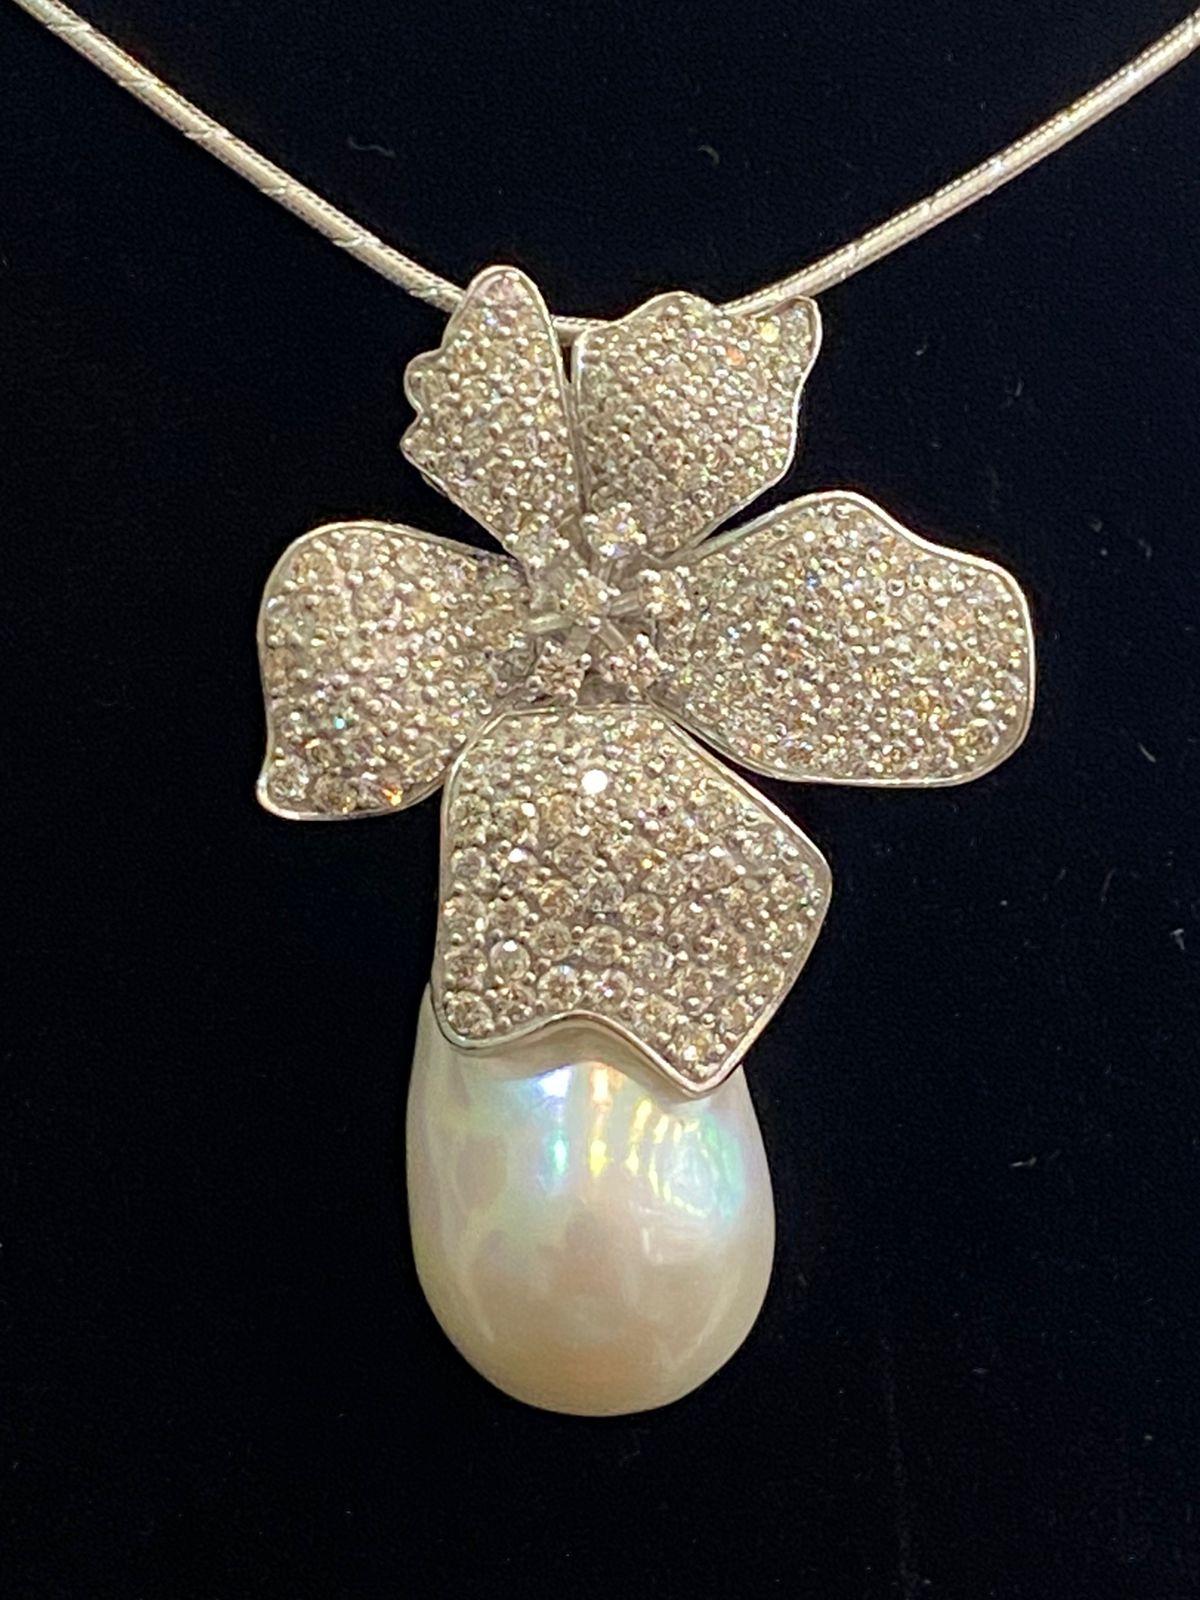 From flowers 🌺 collection, exclusive pendant in 18k with mother pearl 25,38 ct and round brilliant cut diamonds 2,74 ct G/SI.
Handmade jewelry by artisan goldsmith.
Excellent manufacture.